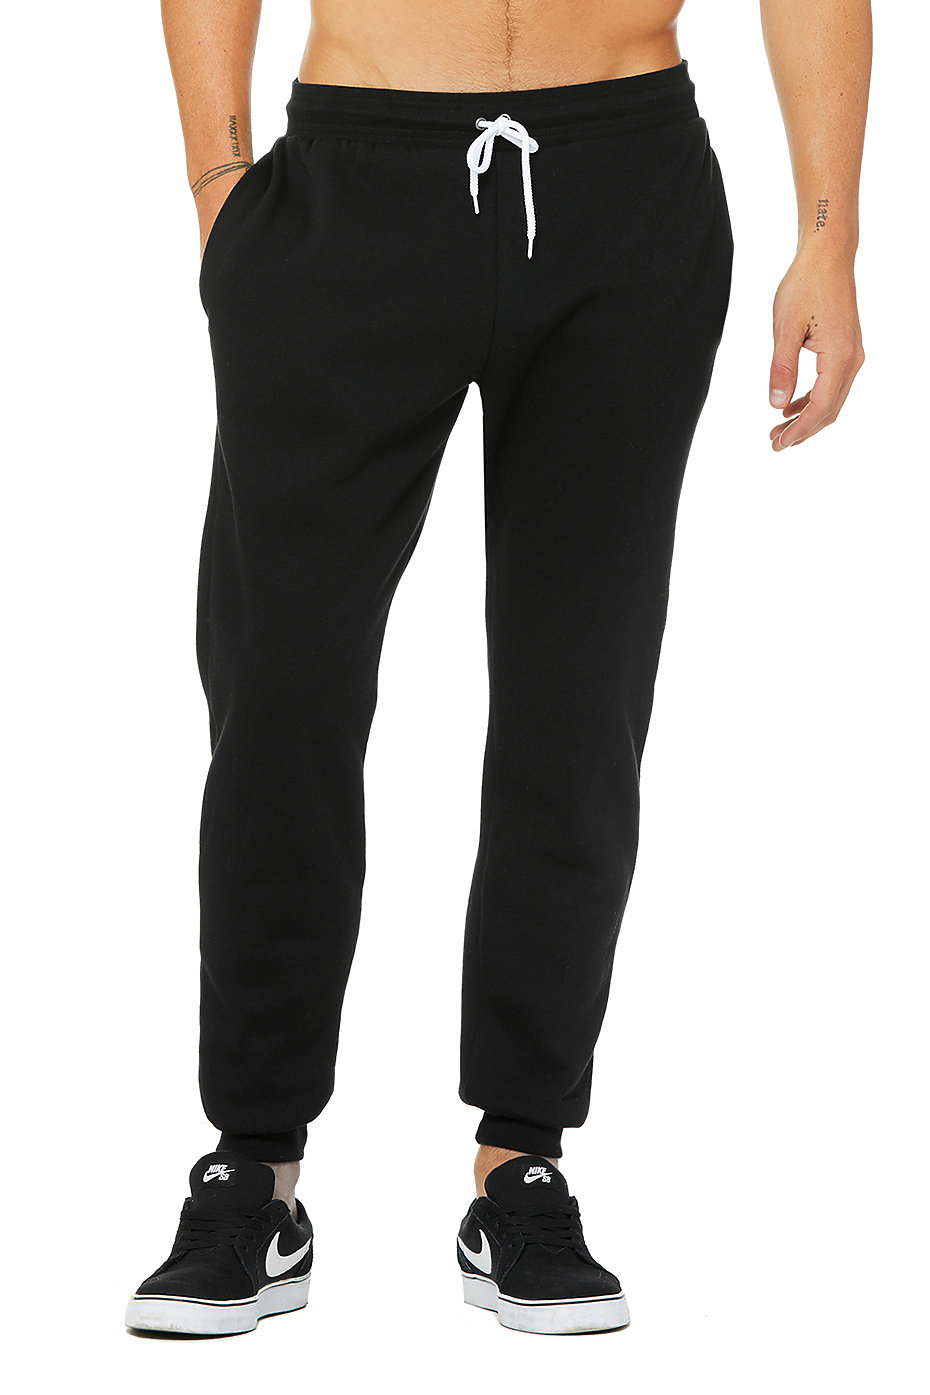 12 Wholesale Ladies Single Jersey Cotton Jogger Pants With Pockets In Black  Size Xlarge